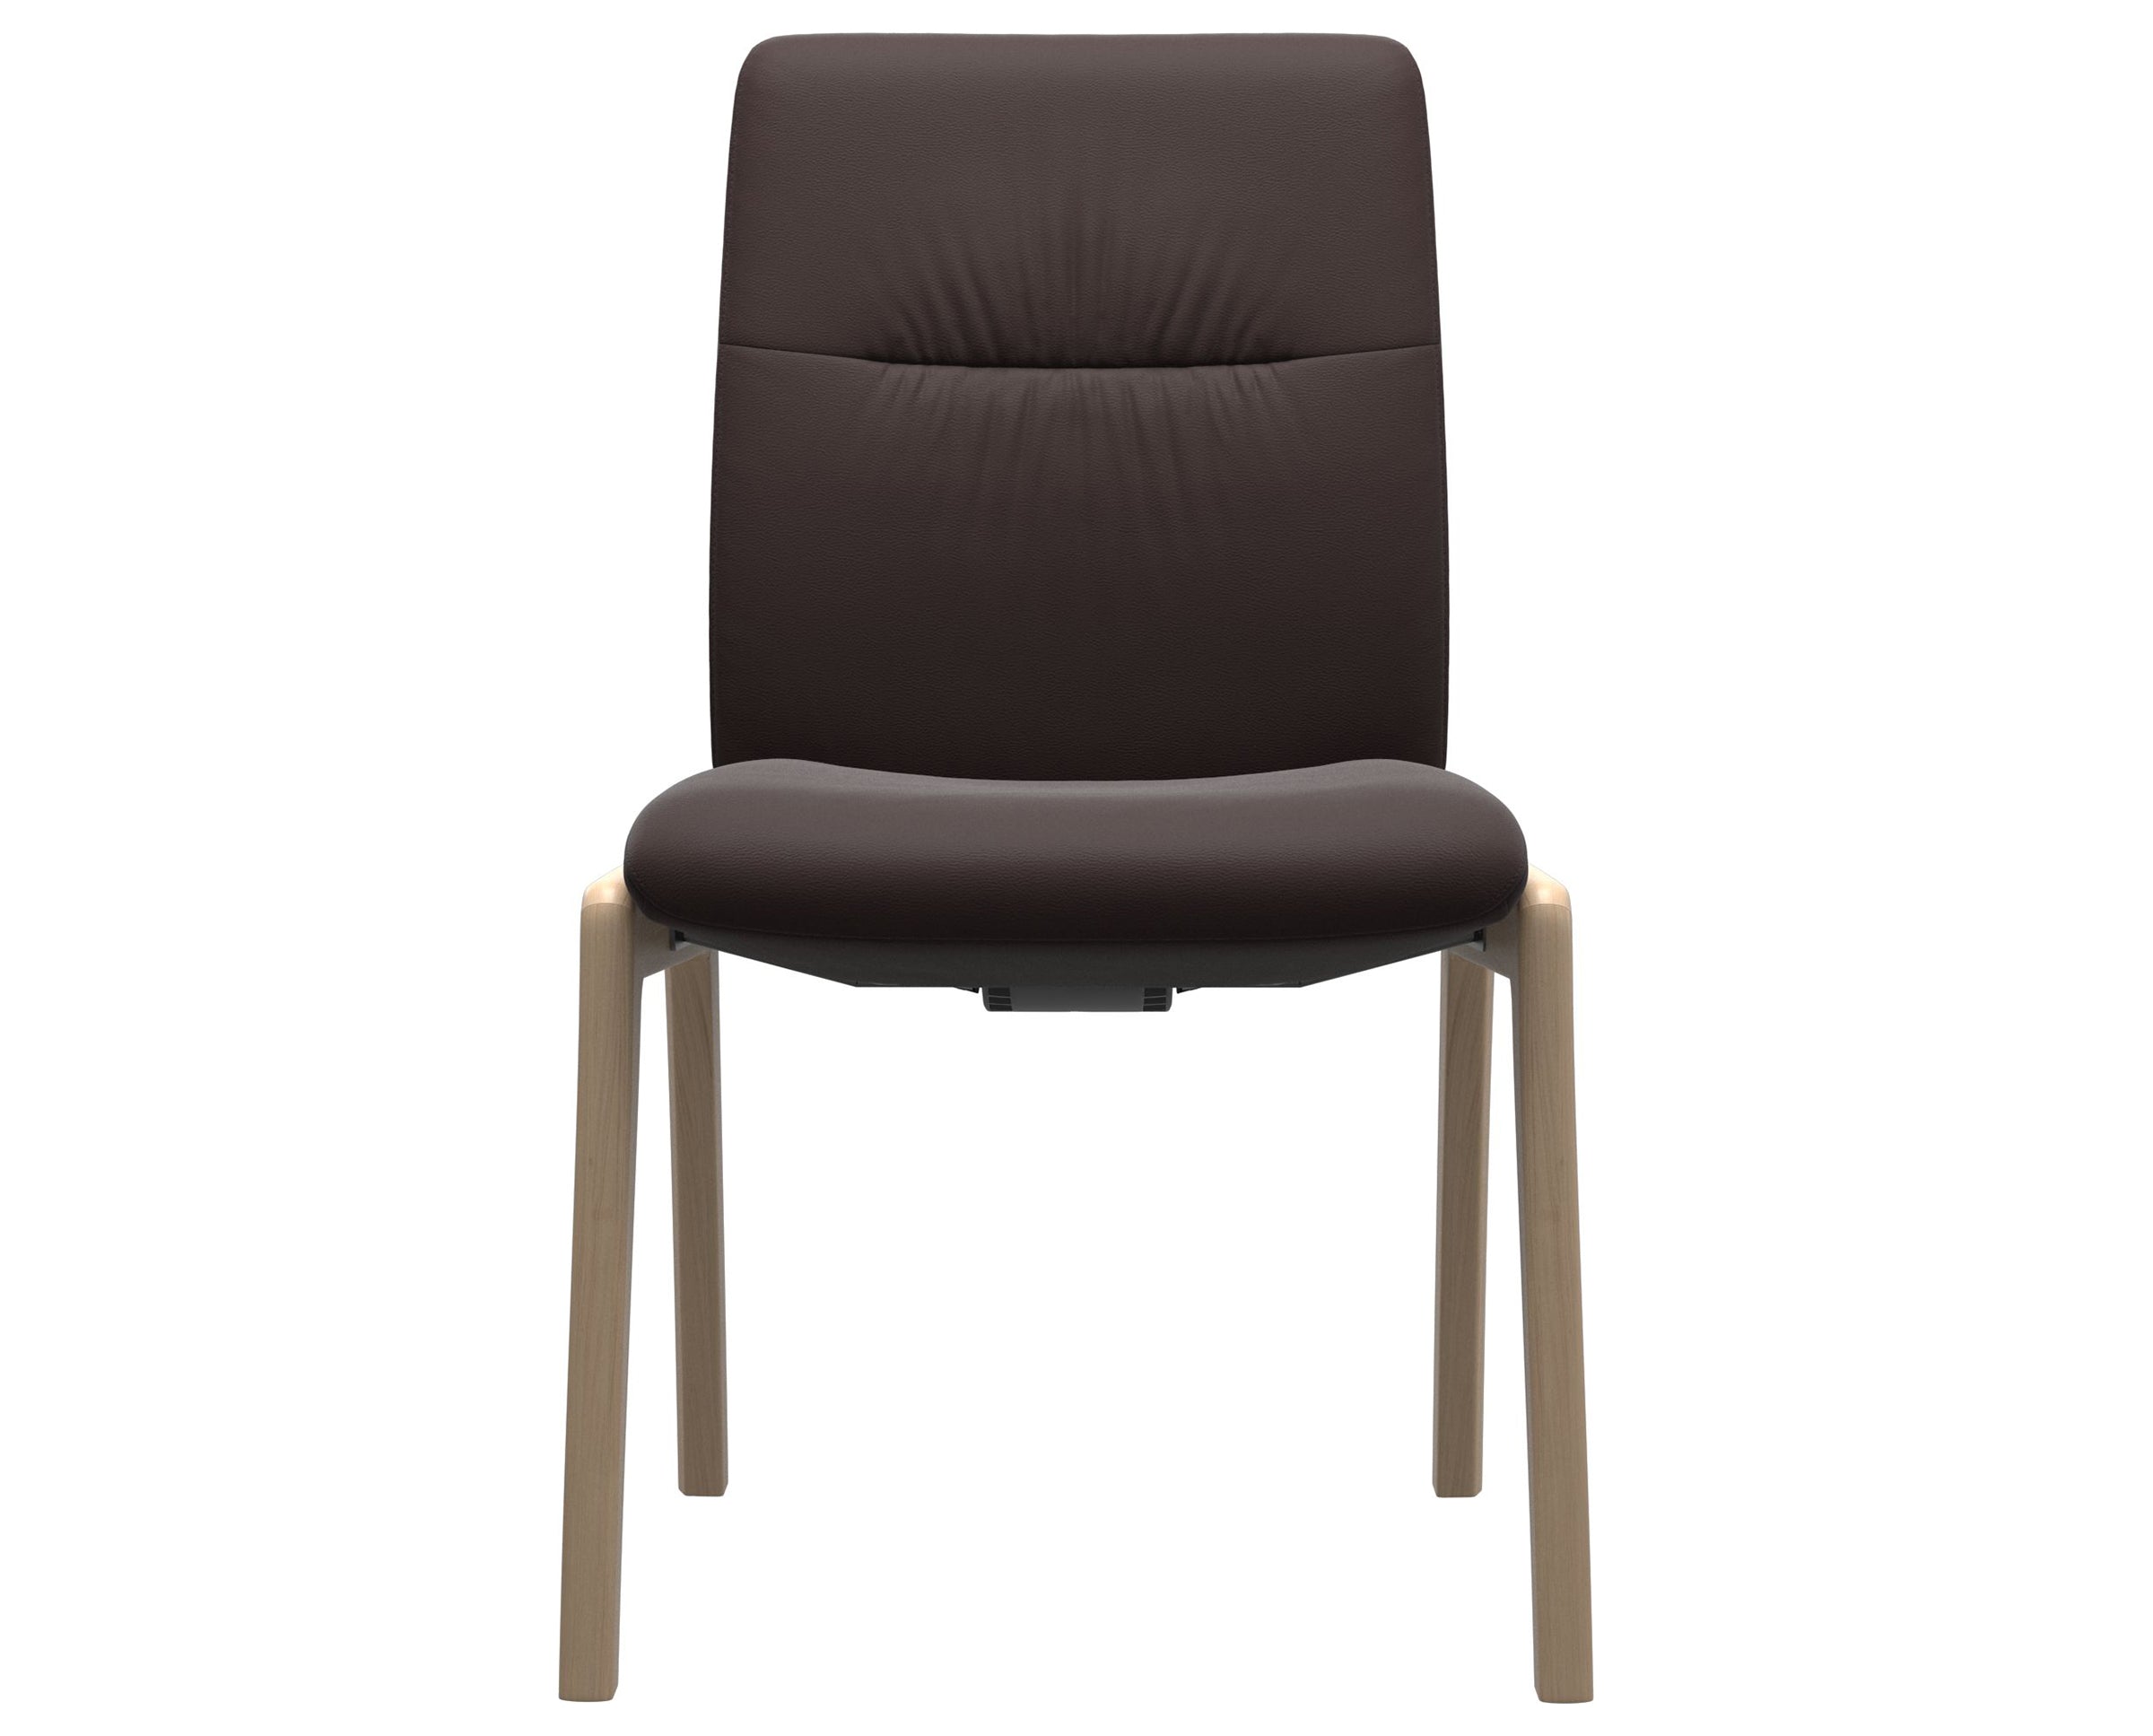 Paloma Leather Chocolate and Natural Base | Stressless Mint Low Back D100 Dining Chair | Valley Ridge Furniture